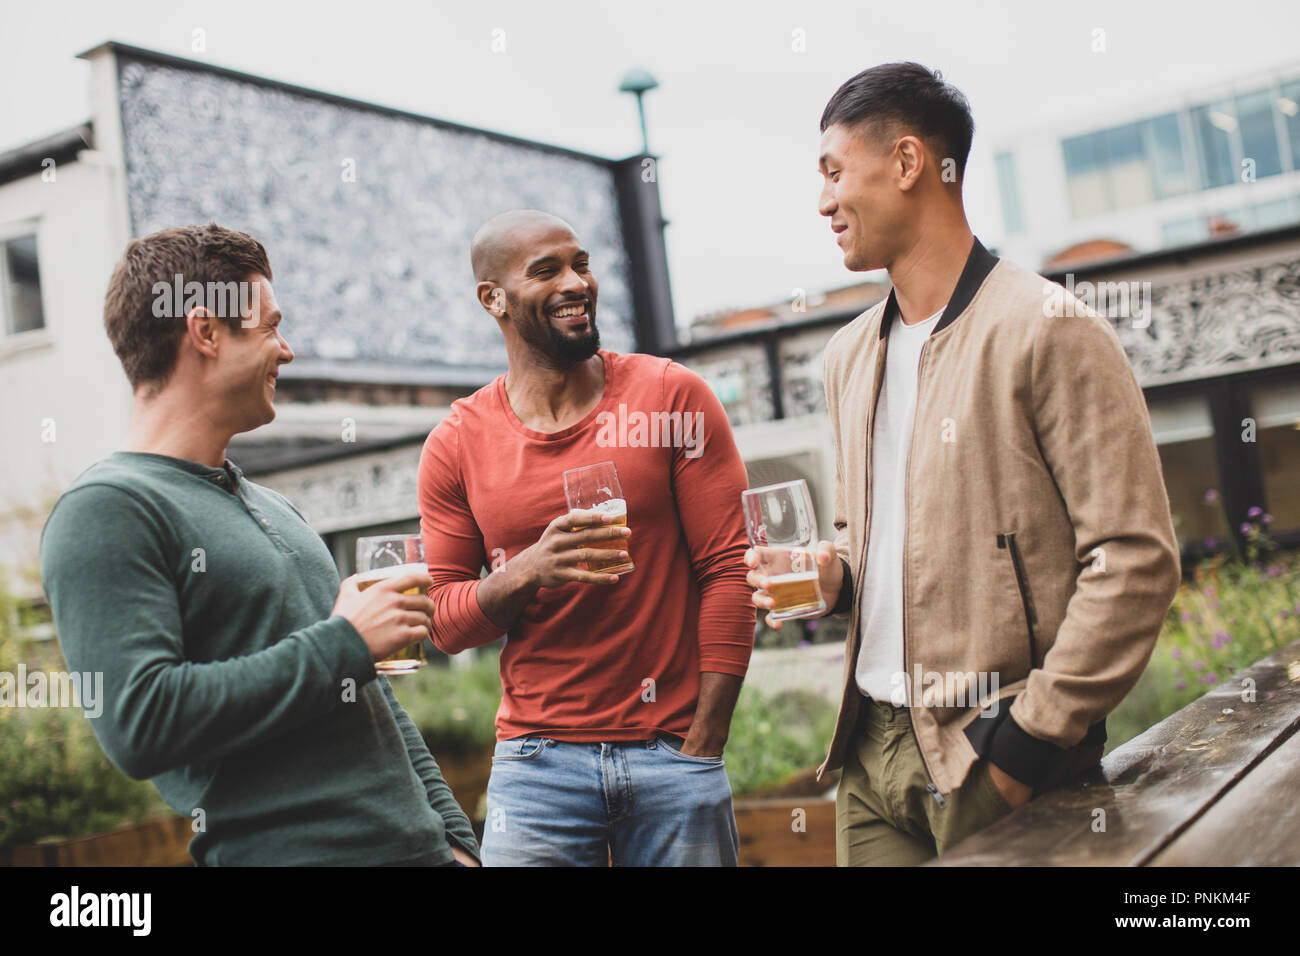 Group of male friends in an outdoor bar Stock Photo